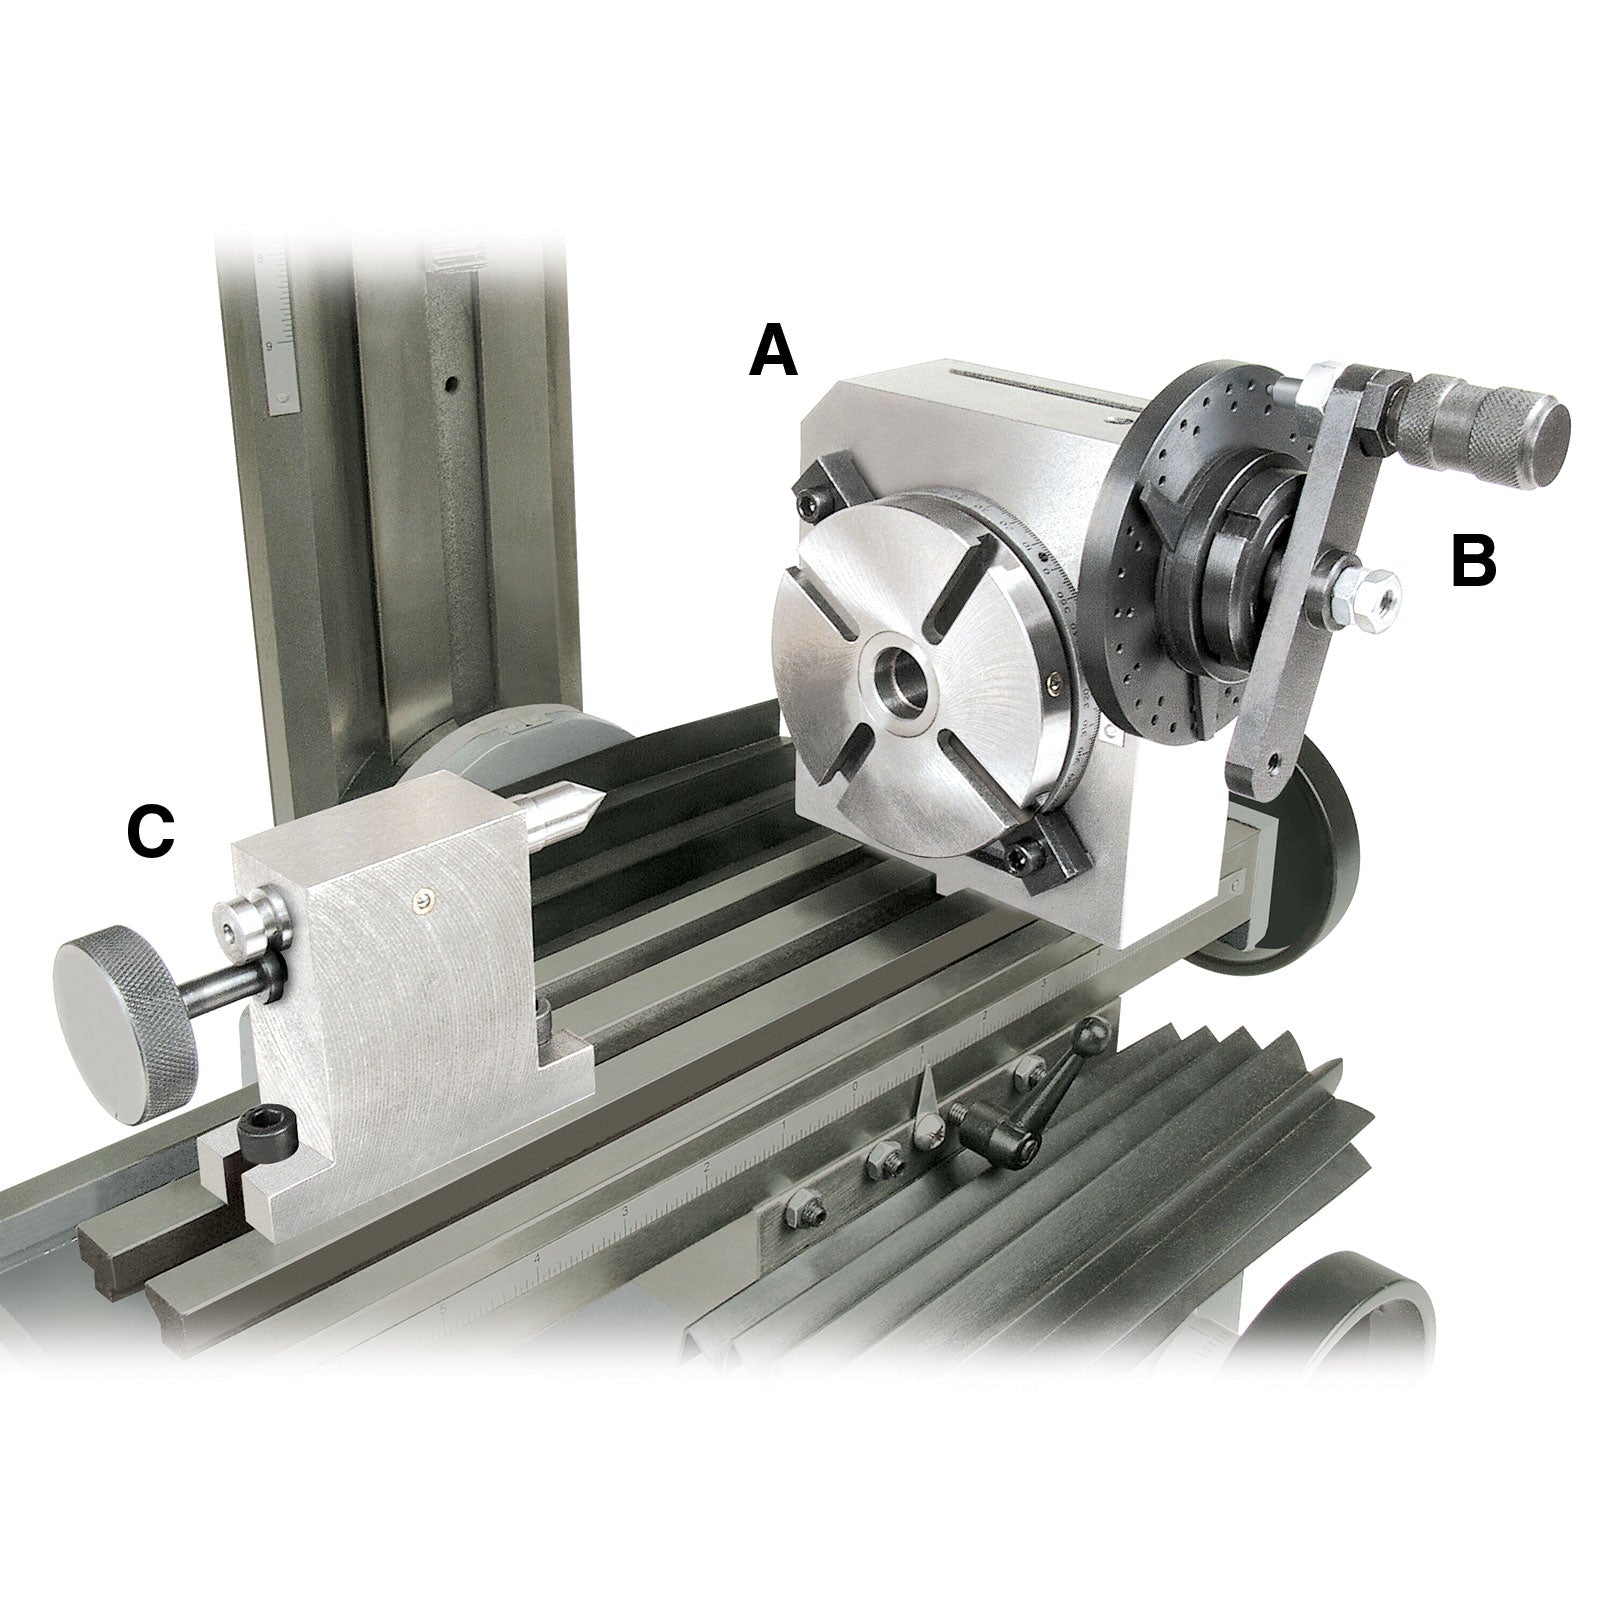 Rotary Table, Dividing Plate and Tailstock Set for Mini Milling Machine